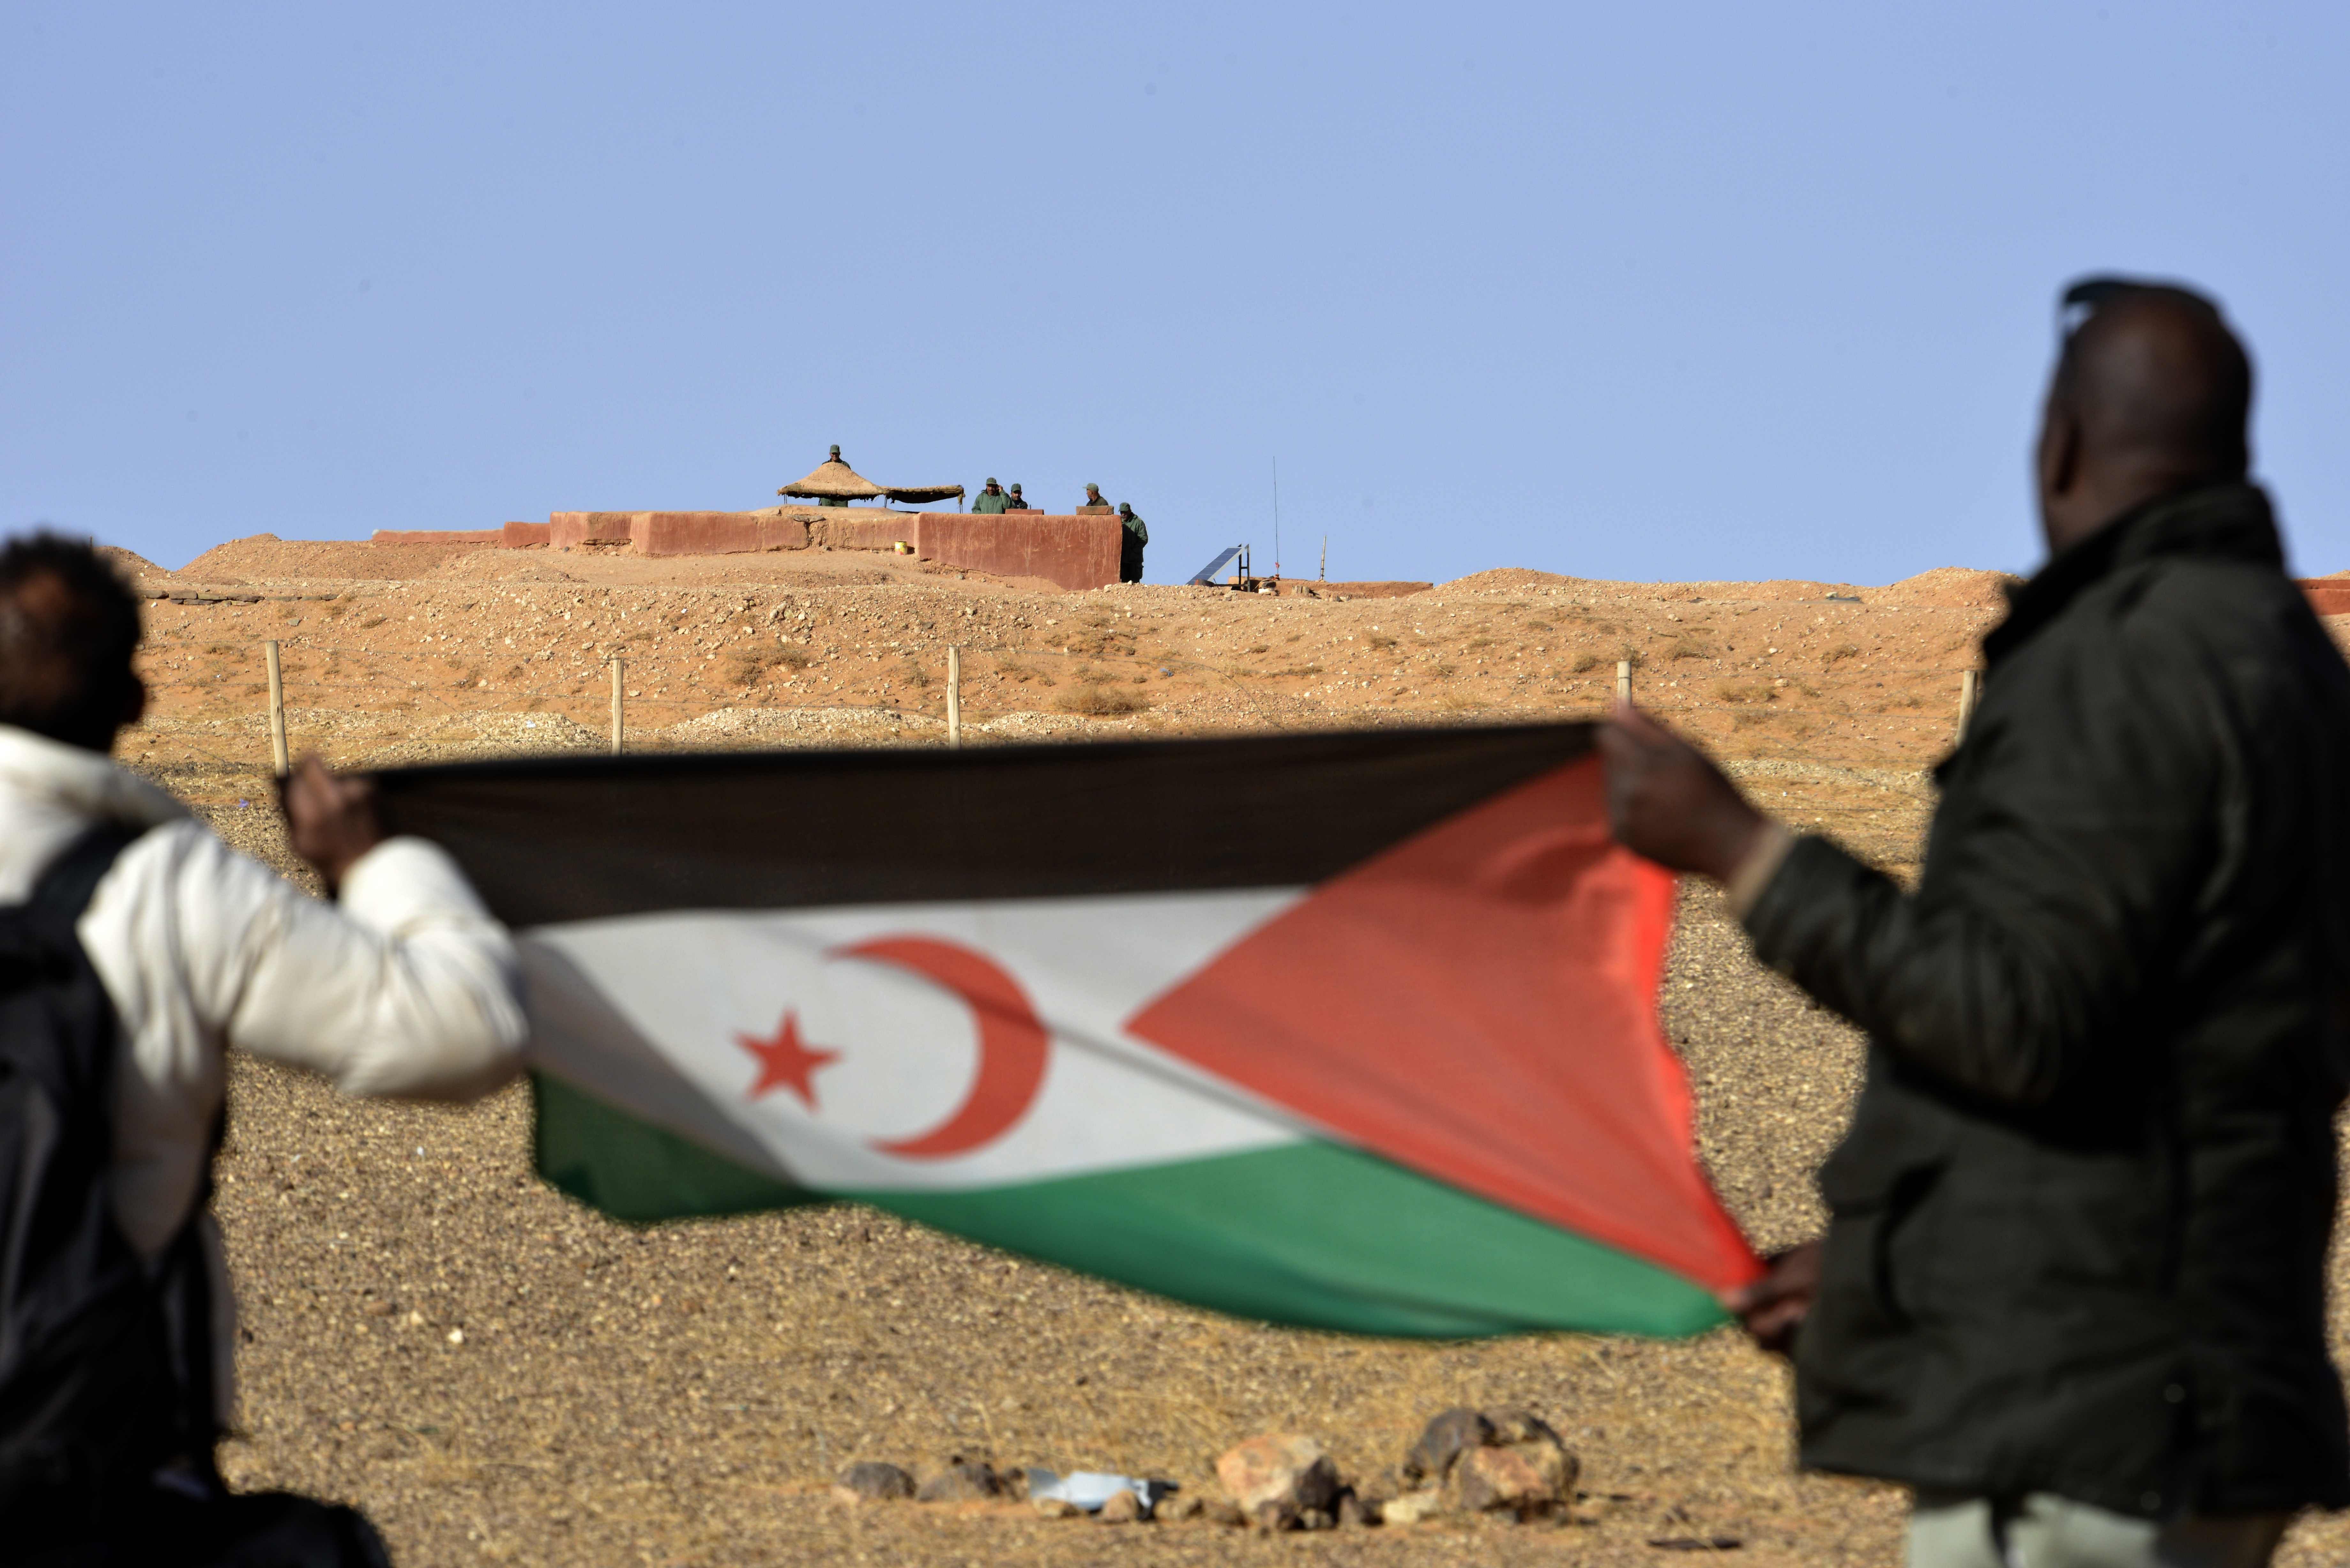 A Saharawi man holds up a Polisario Front flag in the Al-Mahbes area in the Polisario controlled Western Sahara, about 1.000 north west the border crossing of Guerguera. - Morocco announced on November 13, 2020 that its troops have launched an operation in no man's land on the southern border of the Western Sahara to end "provocations" by the pro-independence Polisario Front. Credit: AFP Photo